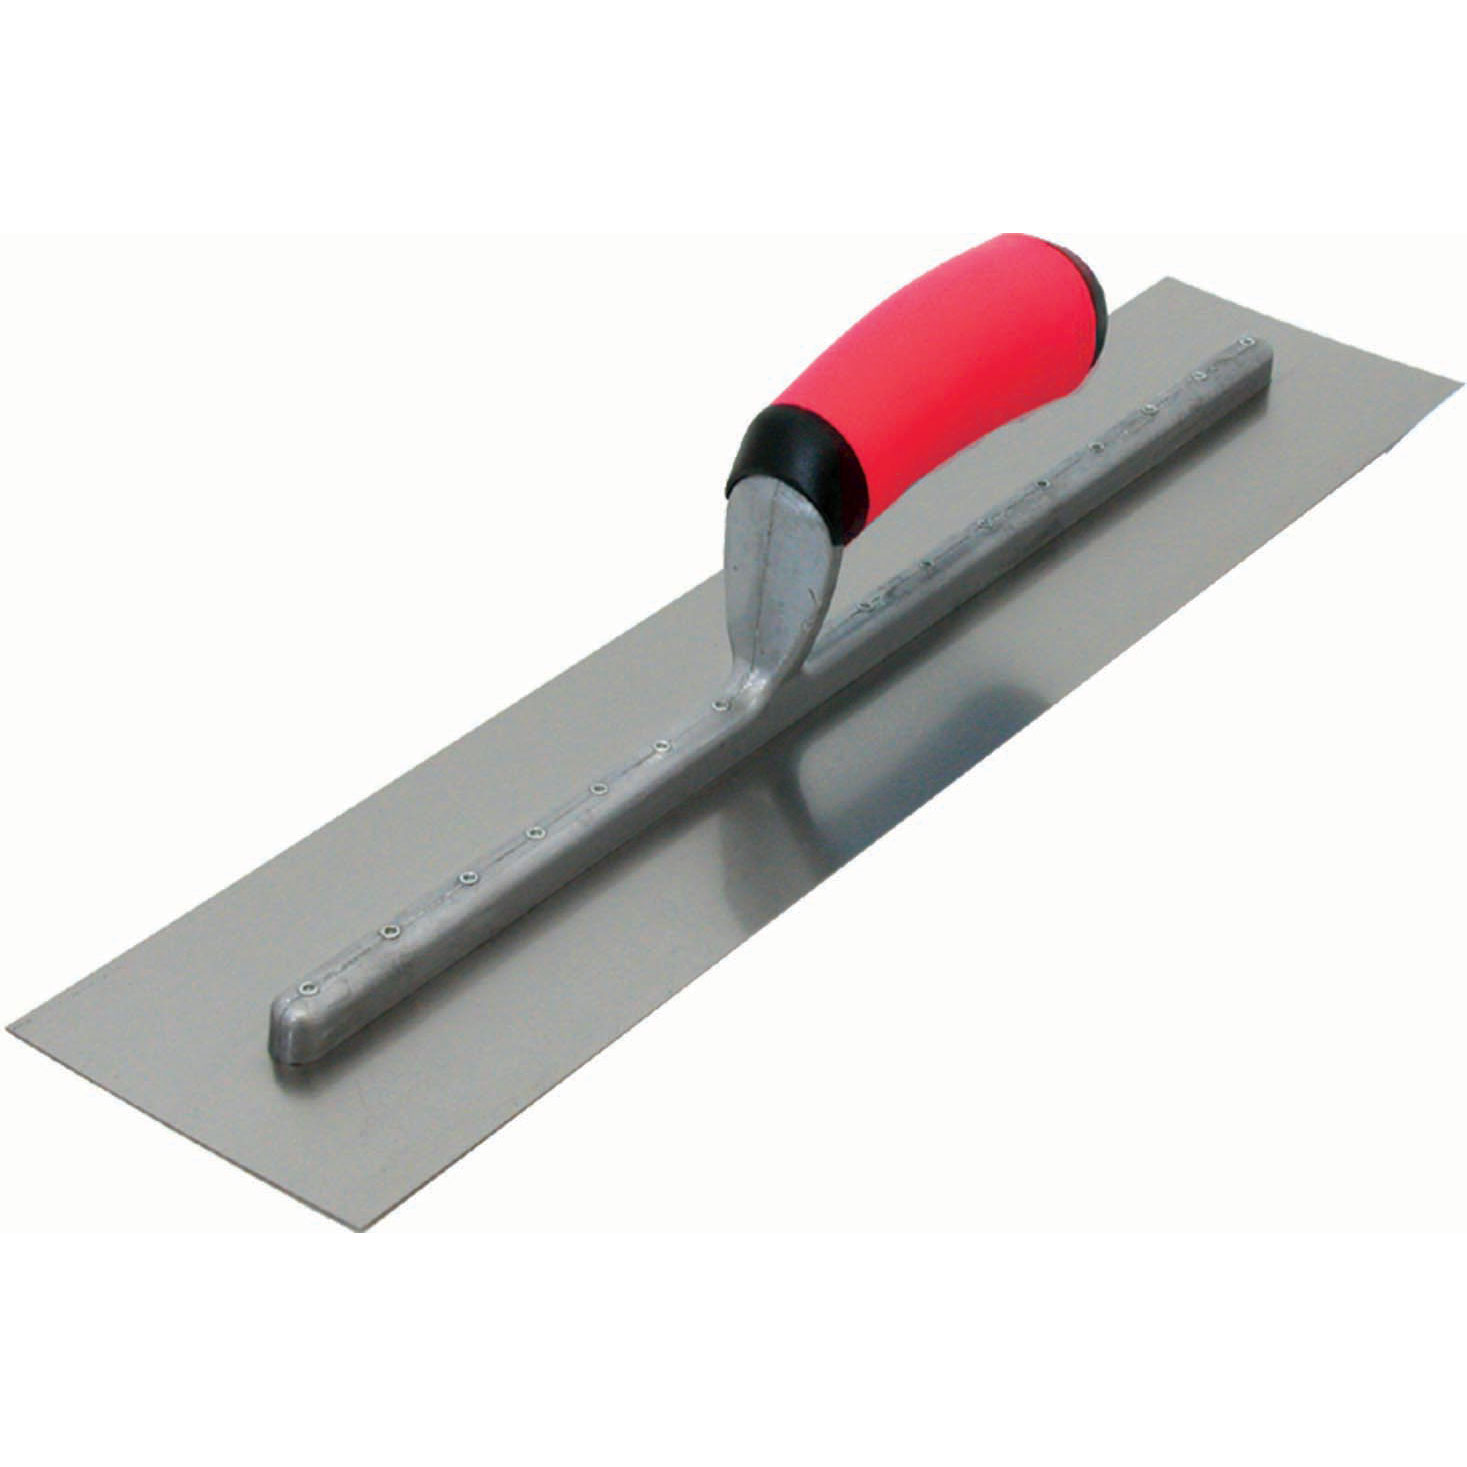 Marshalltown FT375R 18in x 4in Finishing Trowel with Curved Resilient Hdle FT375R